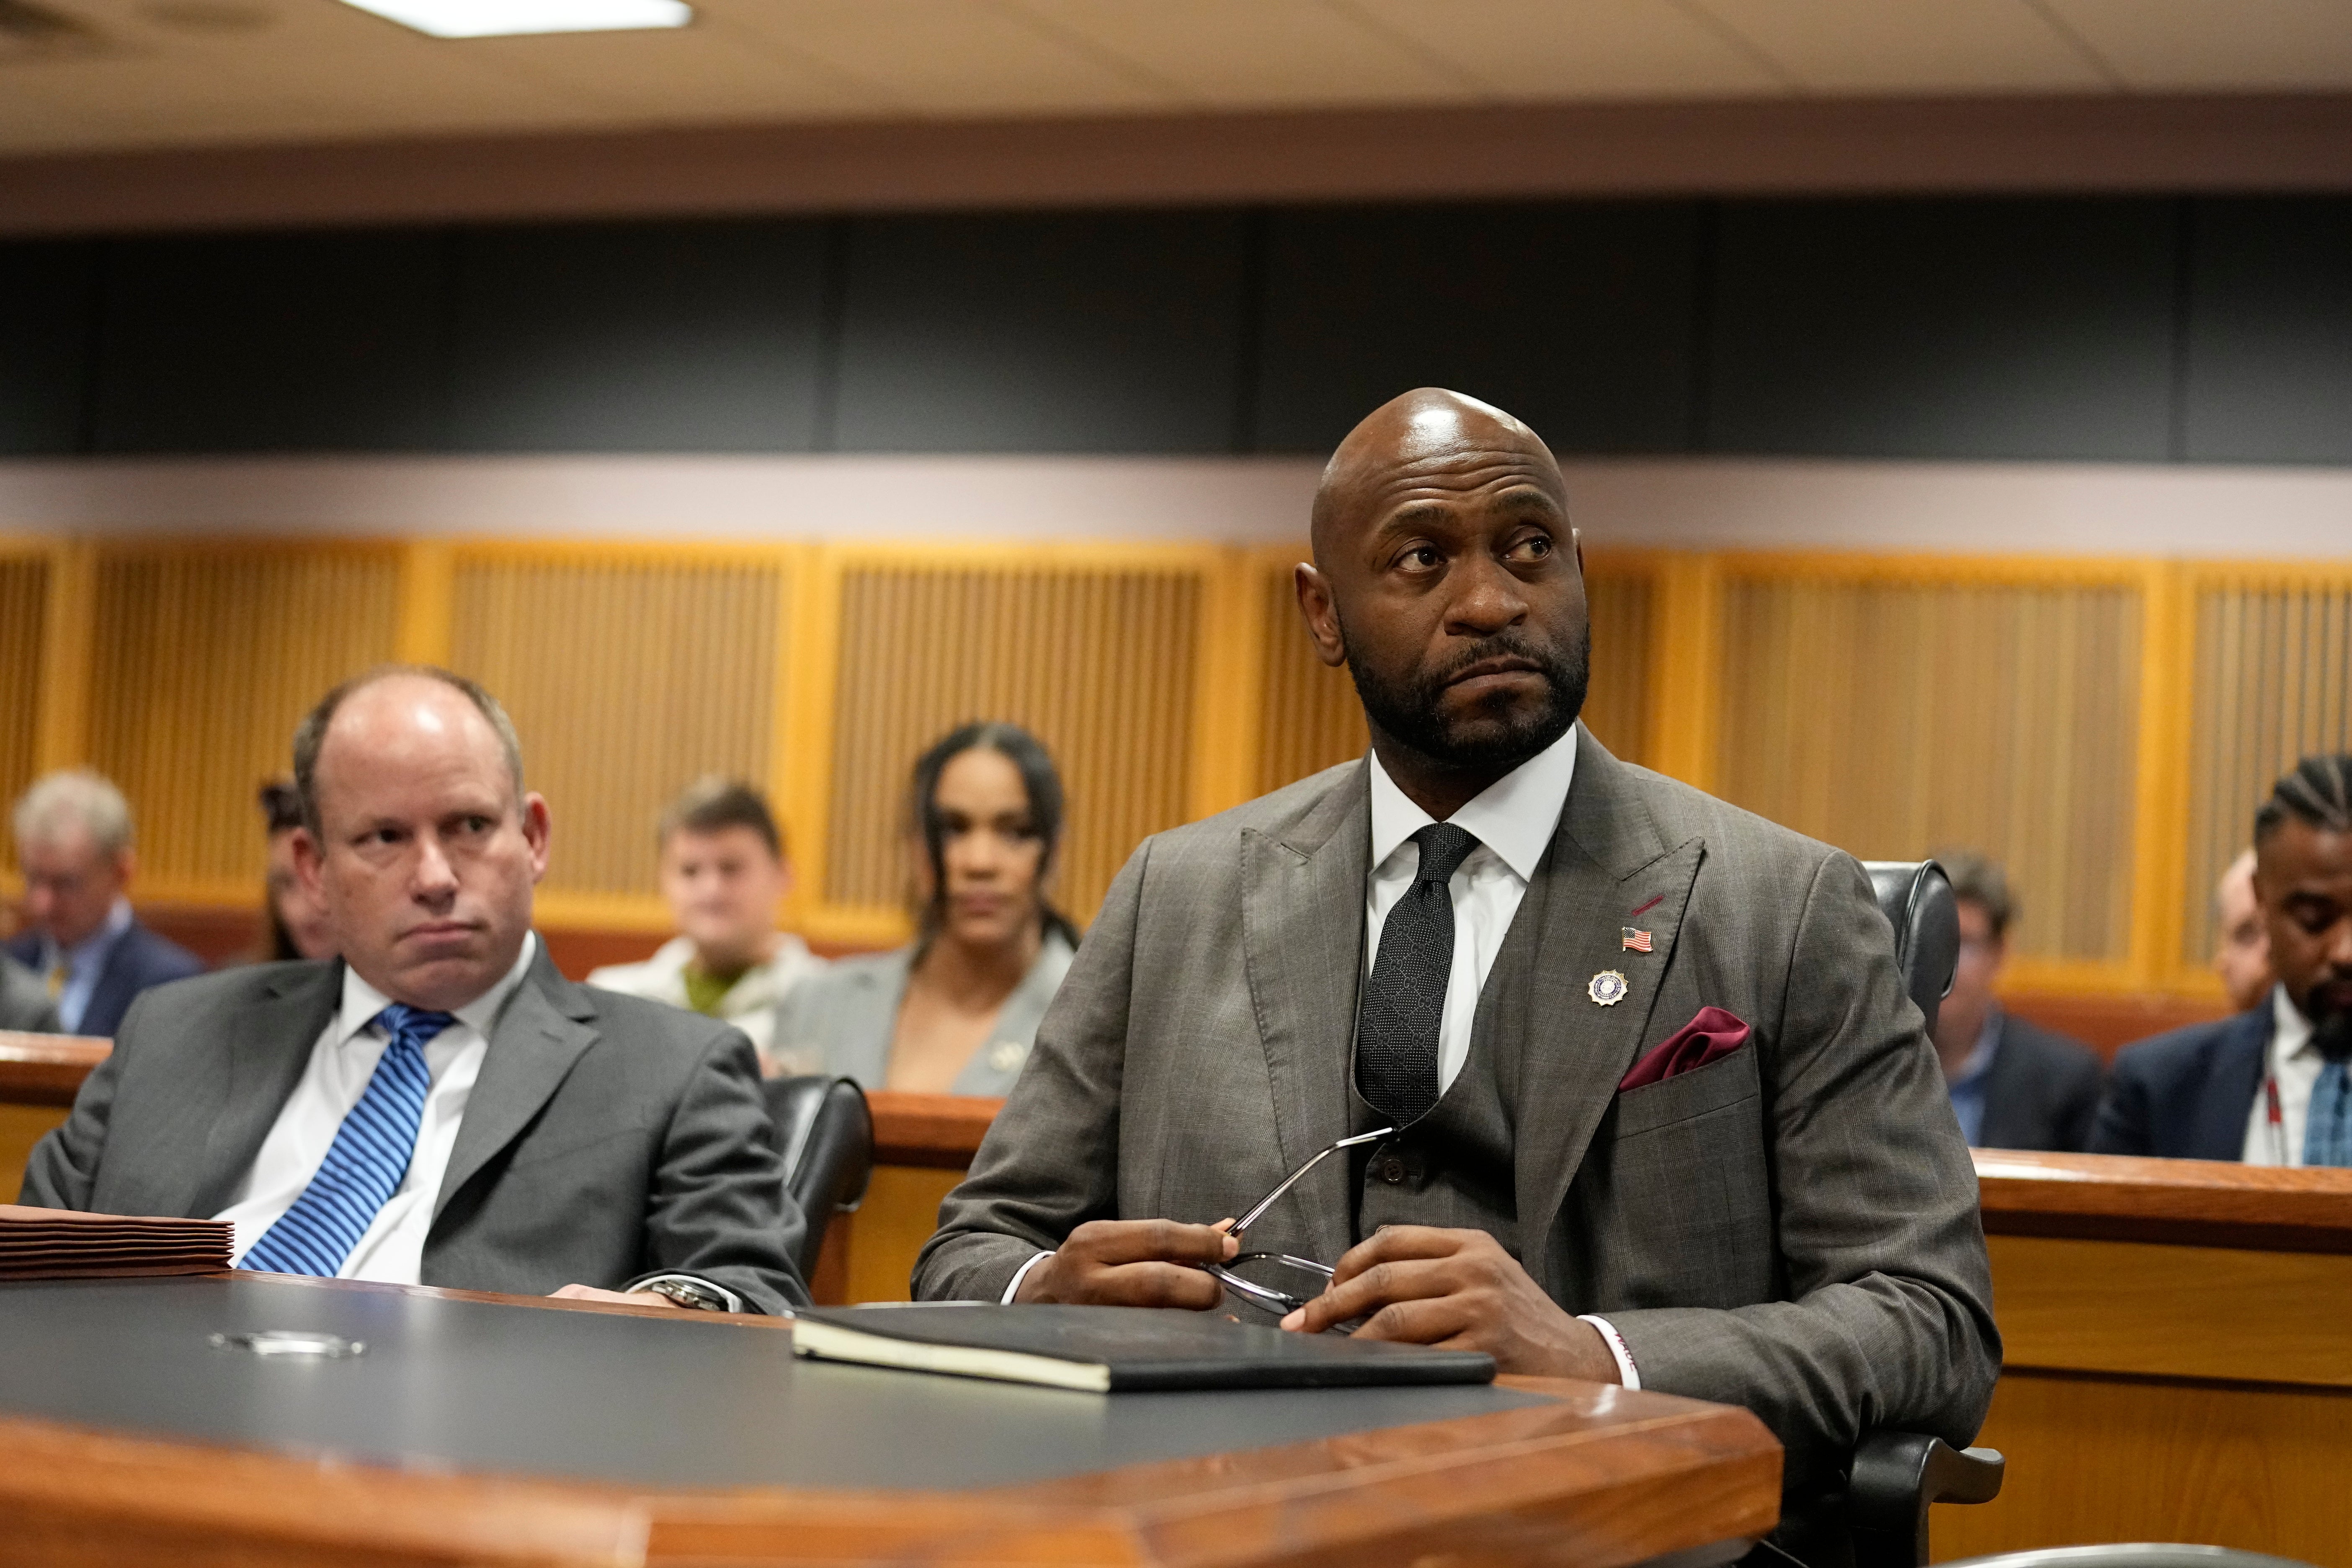 Nathan Wade, a special prosecutor in an election interference case against Donald Trump and more than a dozen others, attends a hearing involving allegations against him and Fulton County District Attorney Fani Willis on 27 February